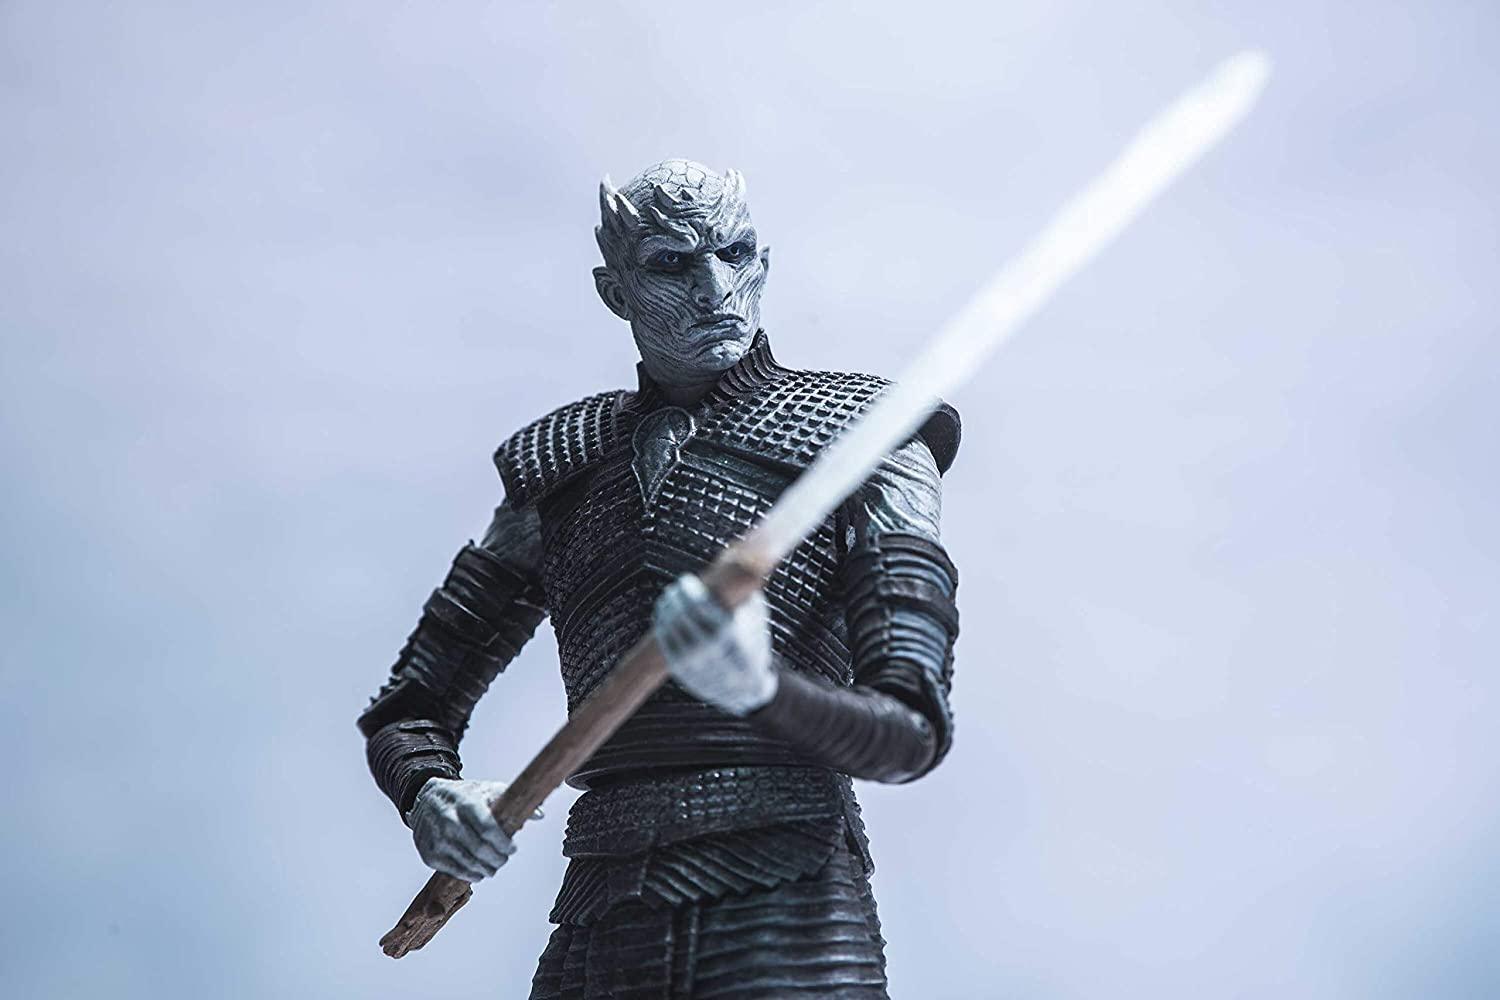 McFarlane Toys Game of Thrones - Night King 6-Inch Action Figure